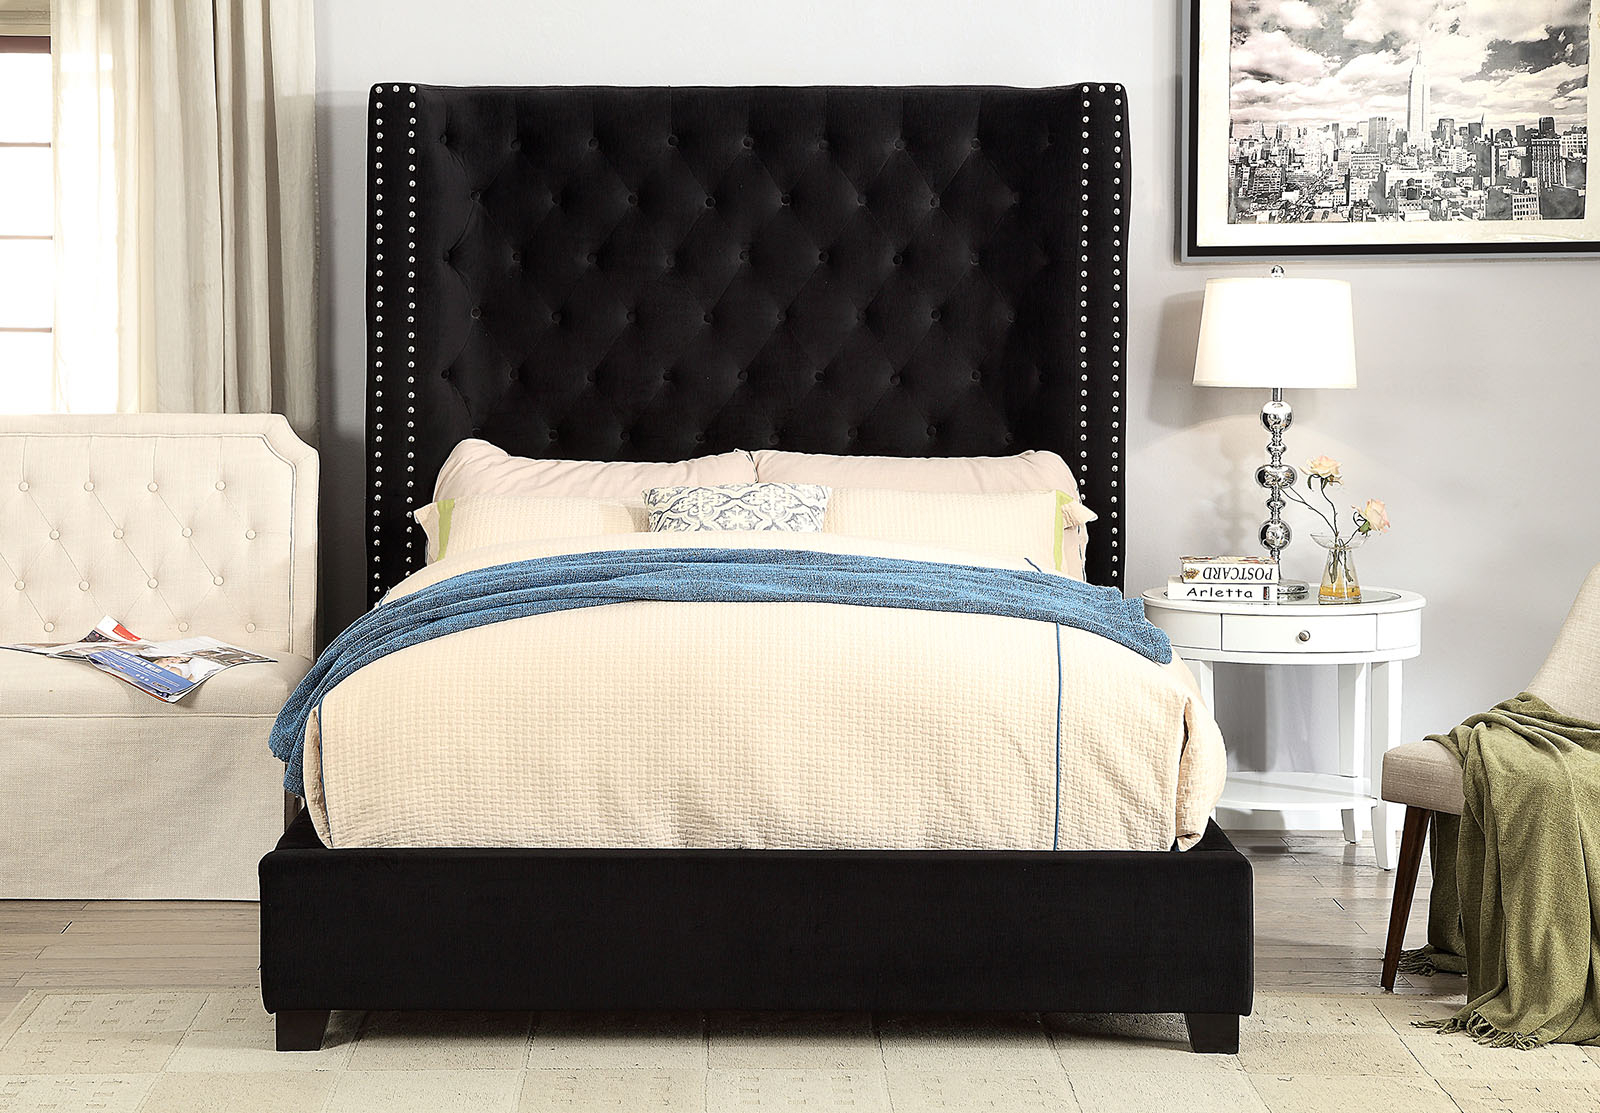 Cm7679bk Mirabelle Black Fabric And Tufted Tall Queen Headboard Bed Frame Set with regard to dimensions 1600 X 1113